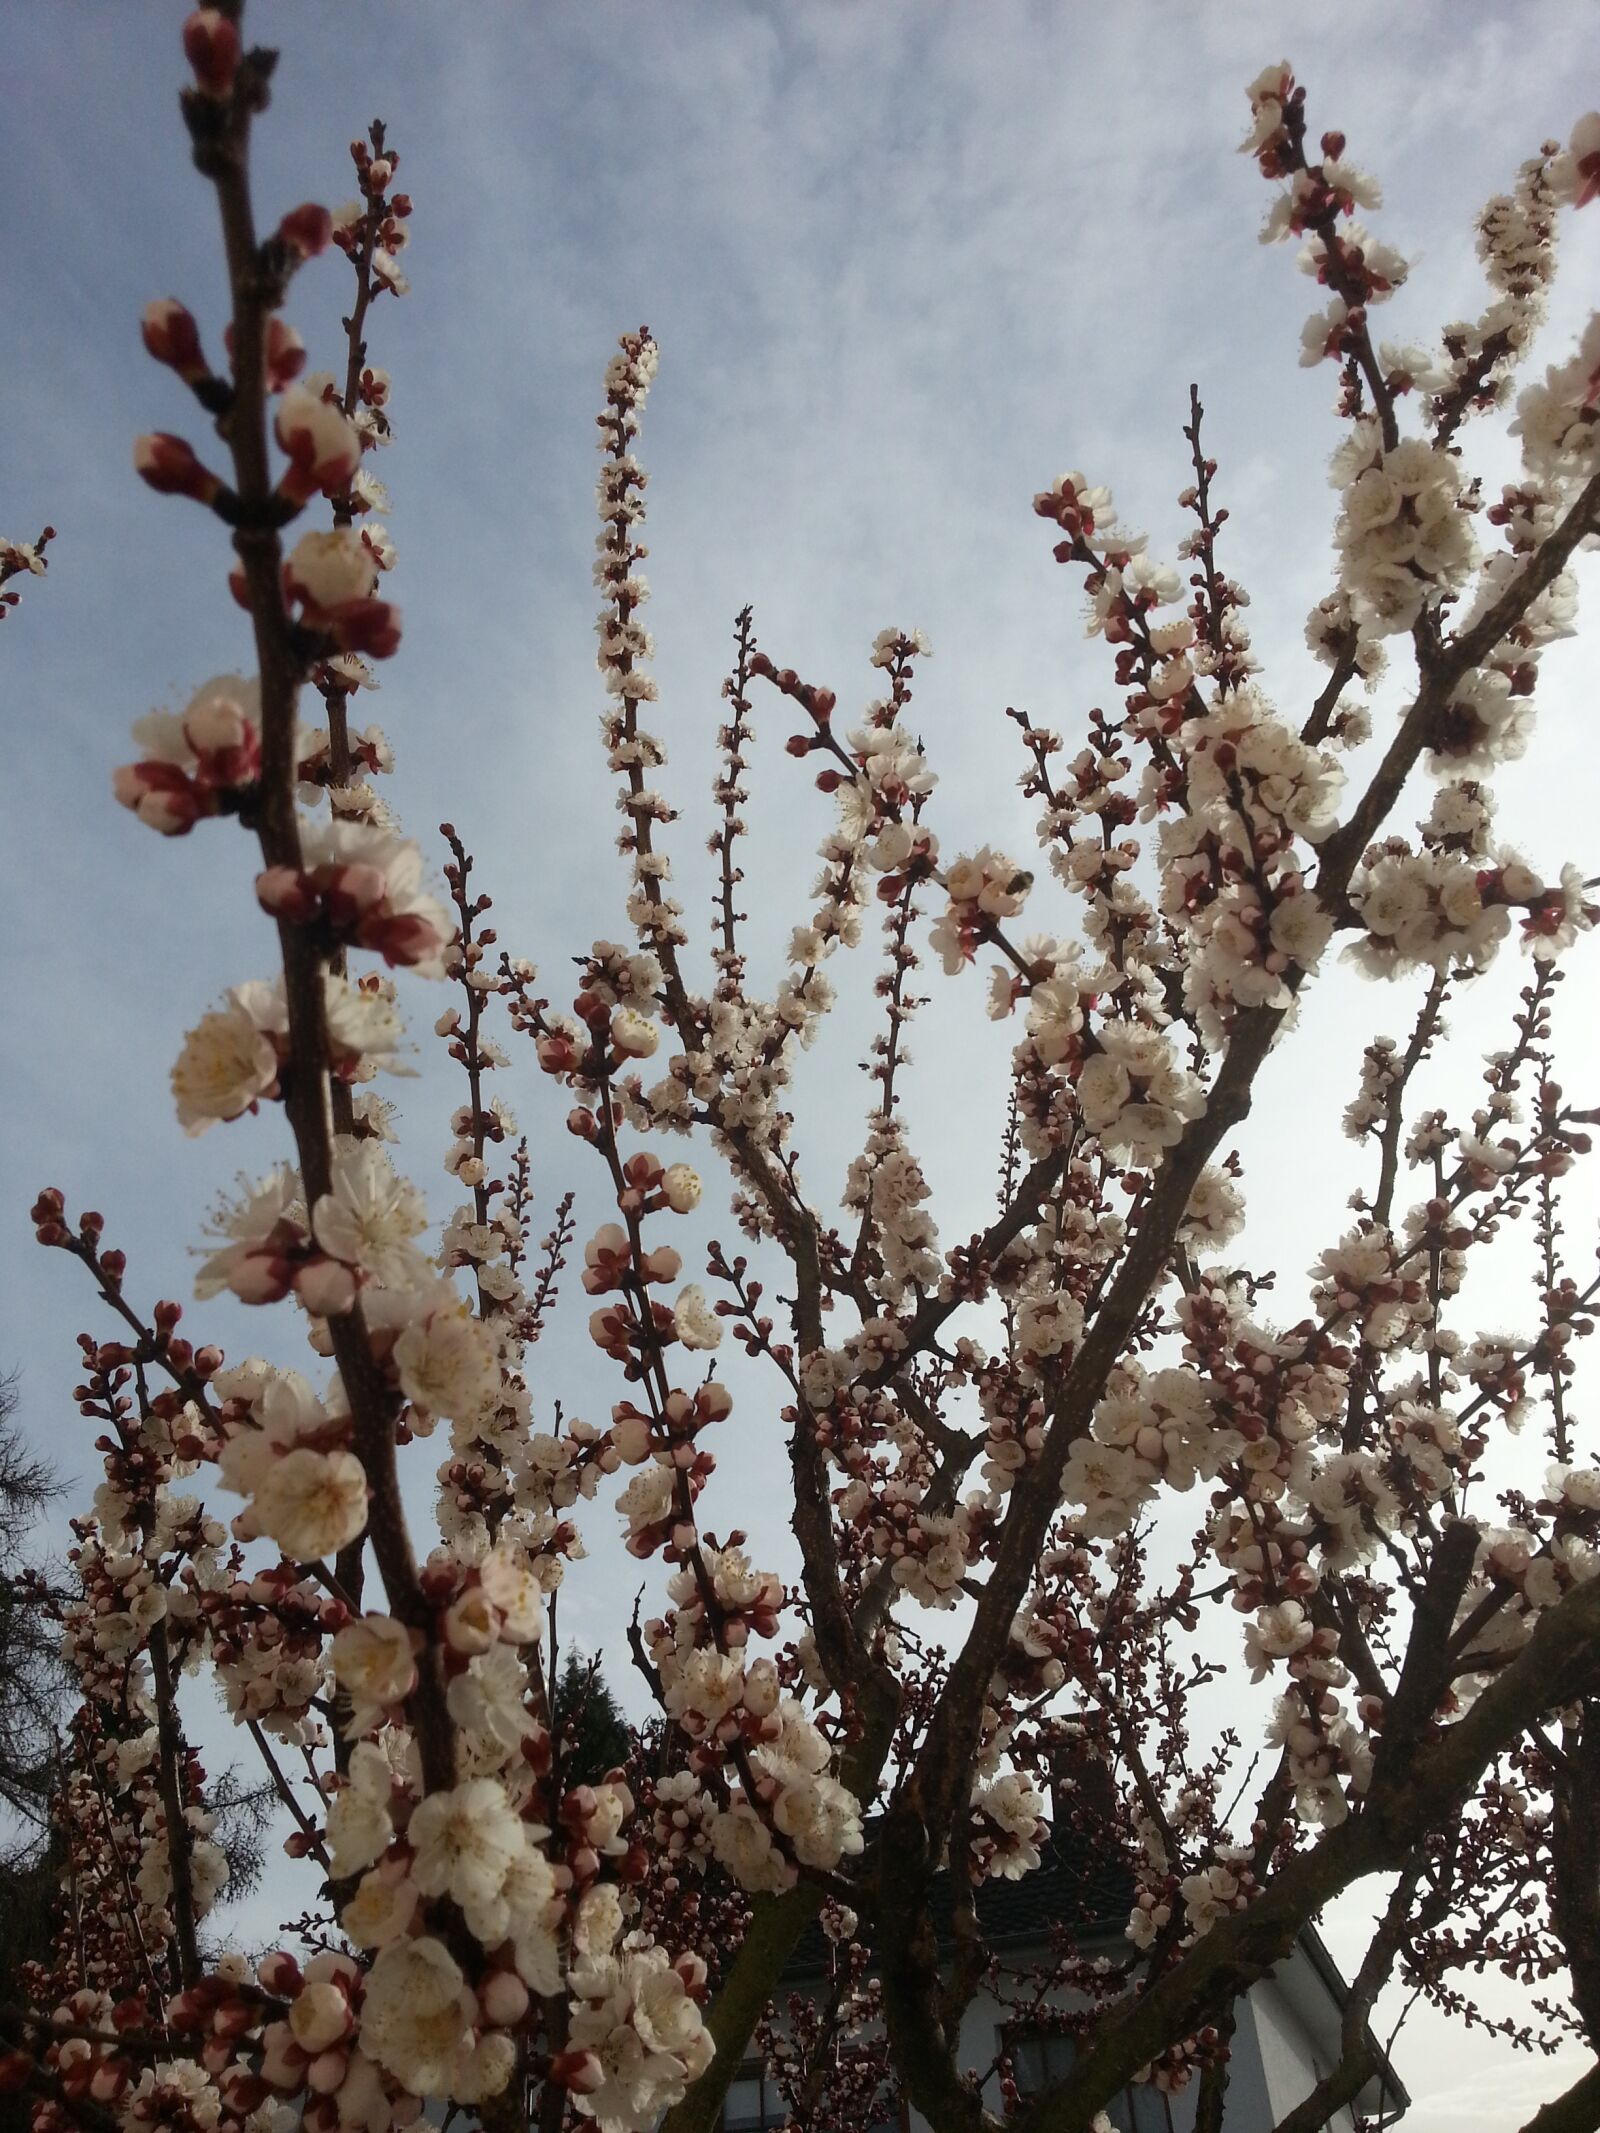 Samsung Galaxy S3 sample photo. Apricots, blossom, bloom photography